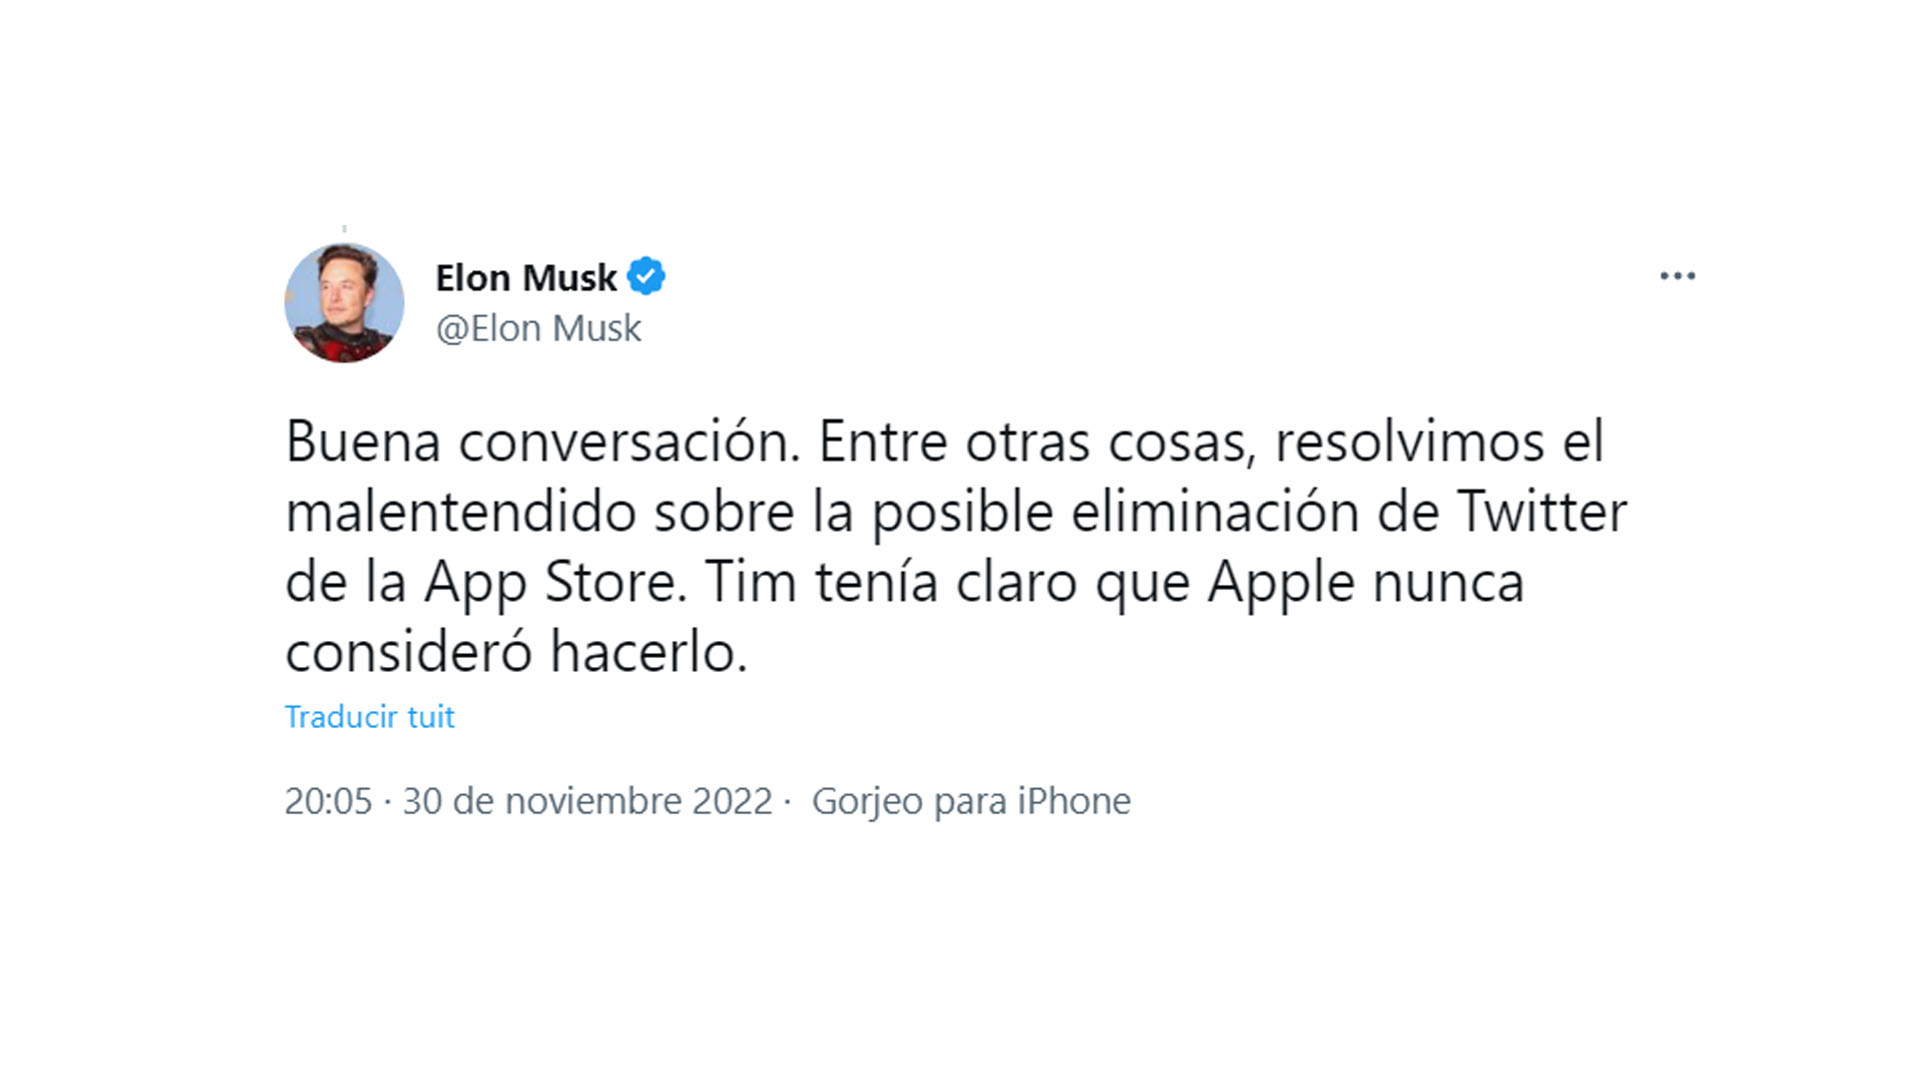 Elon Musk's tweet, reunirse with Tim Cook, the CEO of Apple